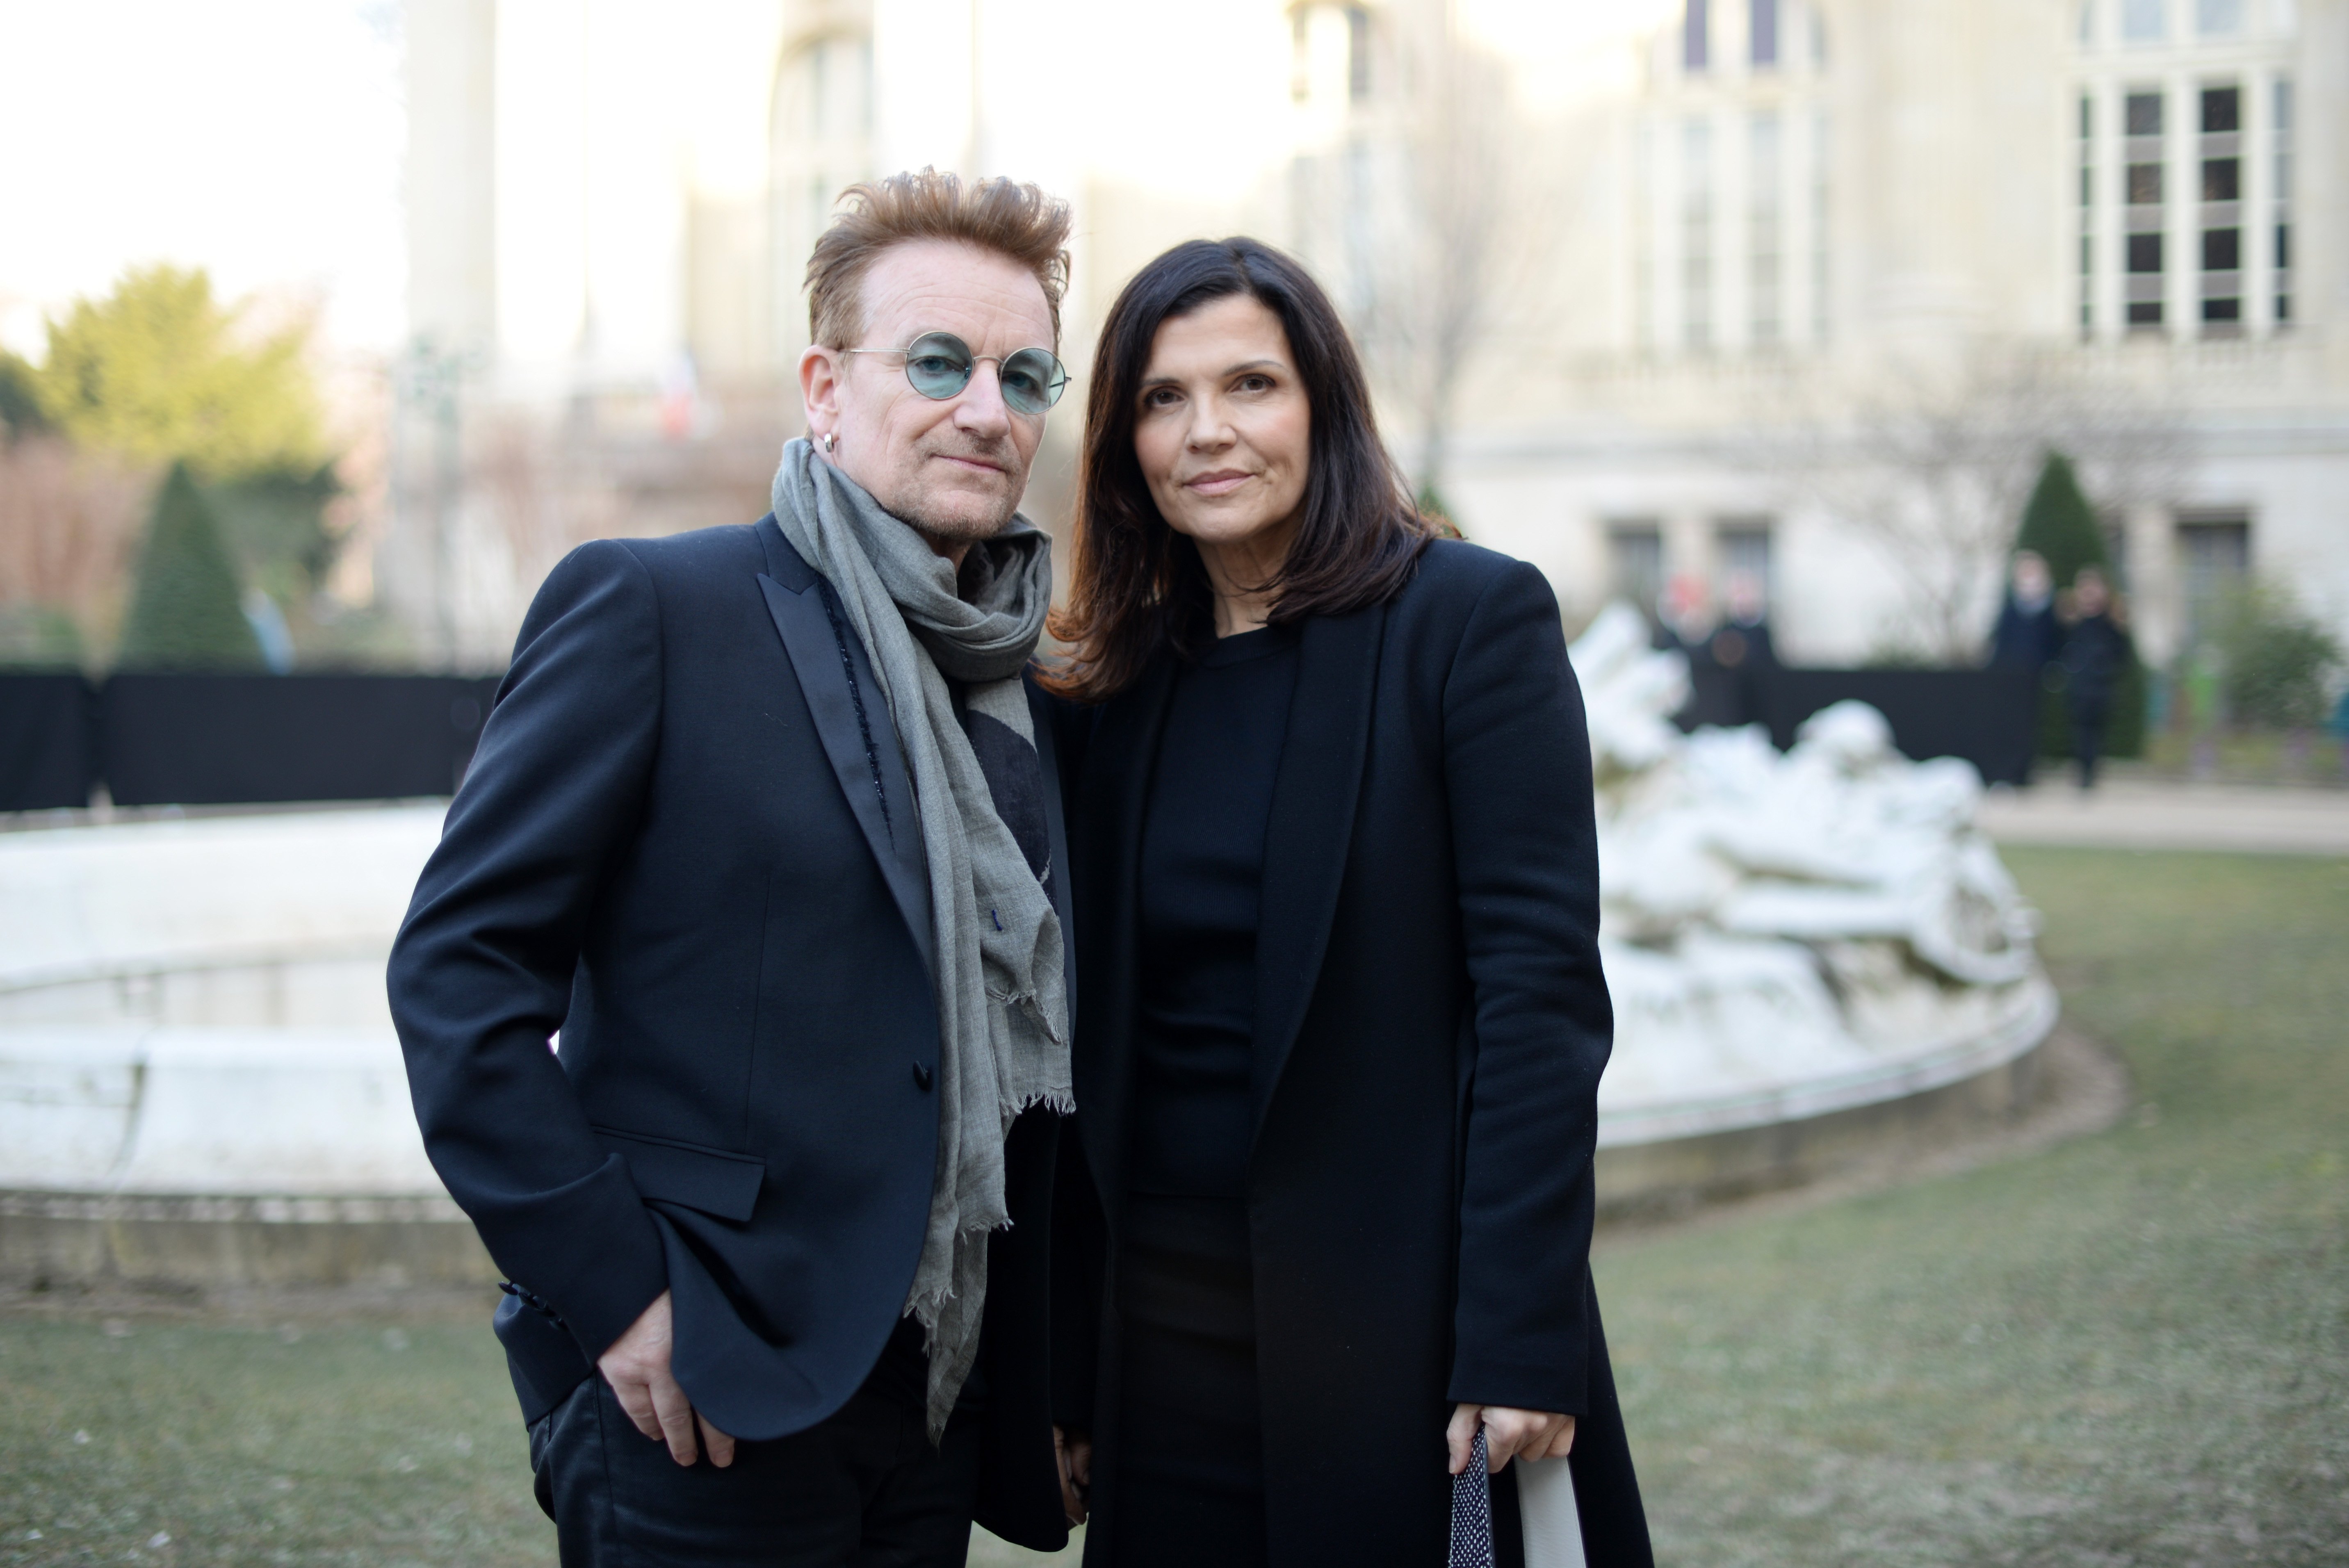 Bono and Ali Hewson at the Dior Homme Menswear Fall/Winter 2017-2018 during Paris Fashion Week on January 21, 2017 | Source: Getty Images